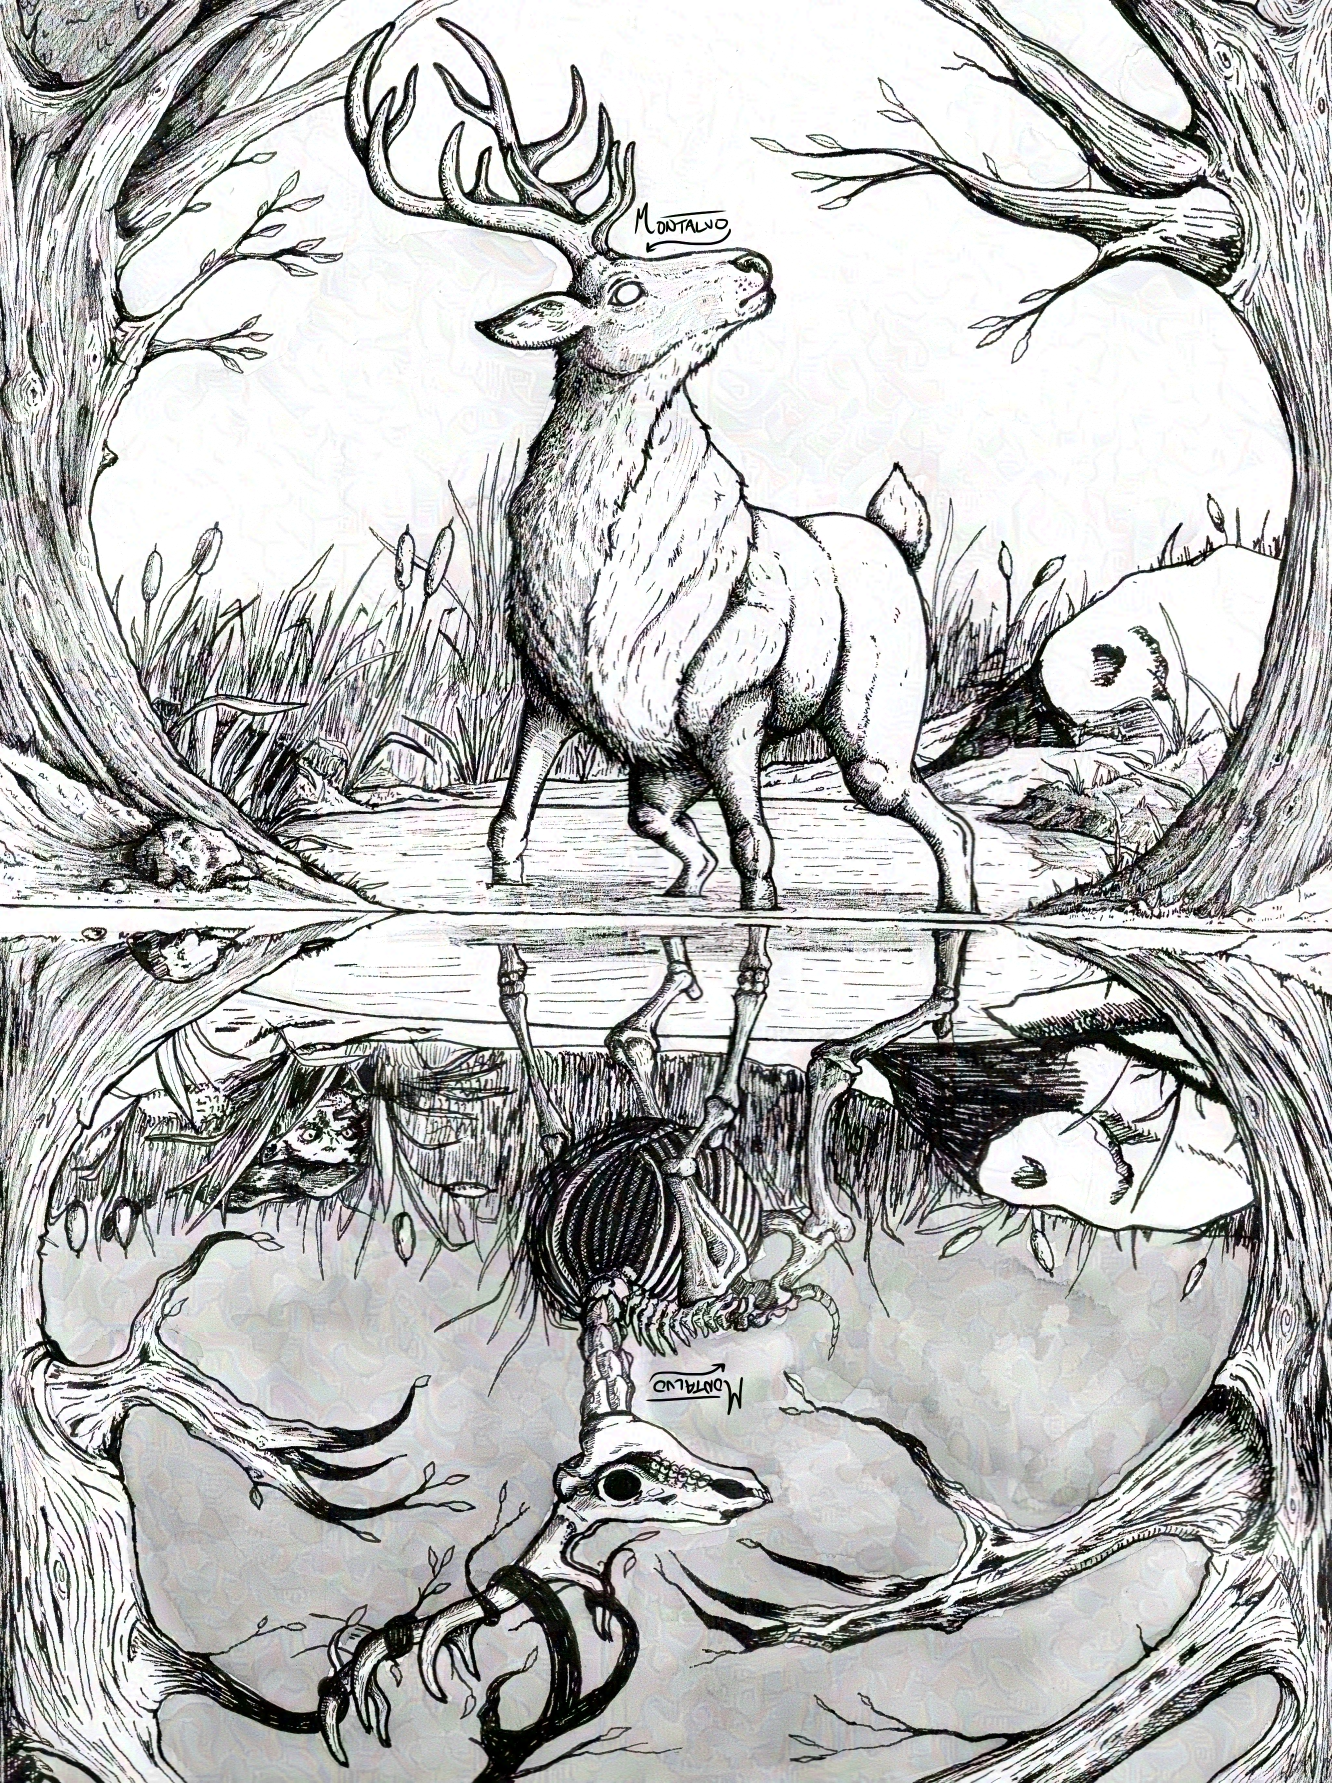 An ink illustration. The top half is a stag standing in knee-deep
          water and looking up with pride. The bottom half is his reflection, a skeleton whose antlers are trapped in the branches.